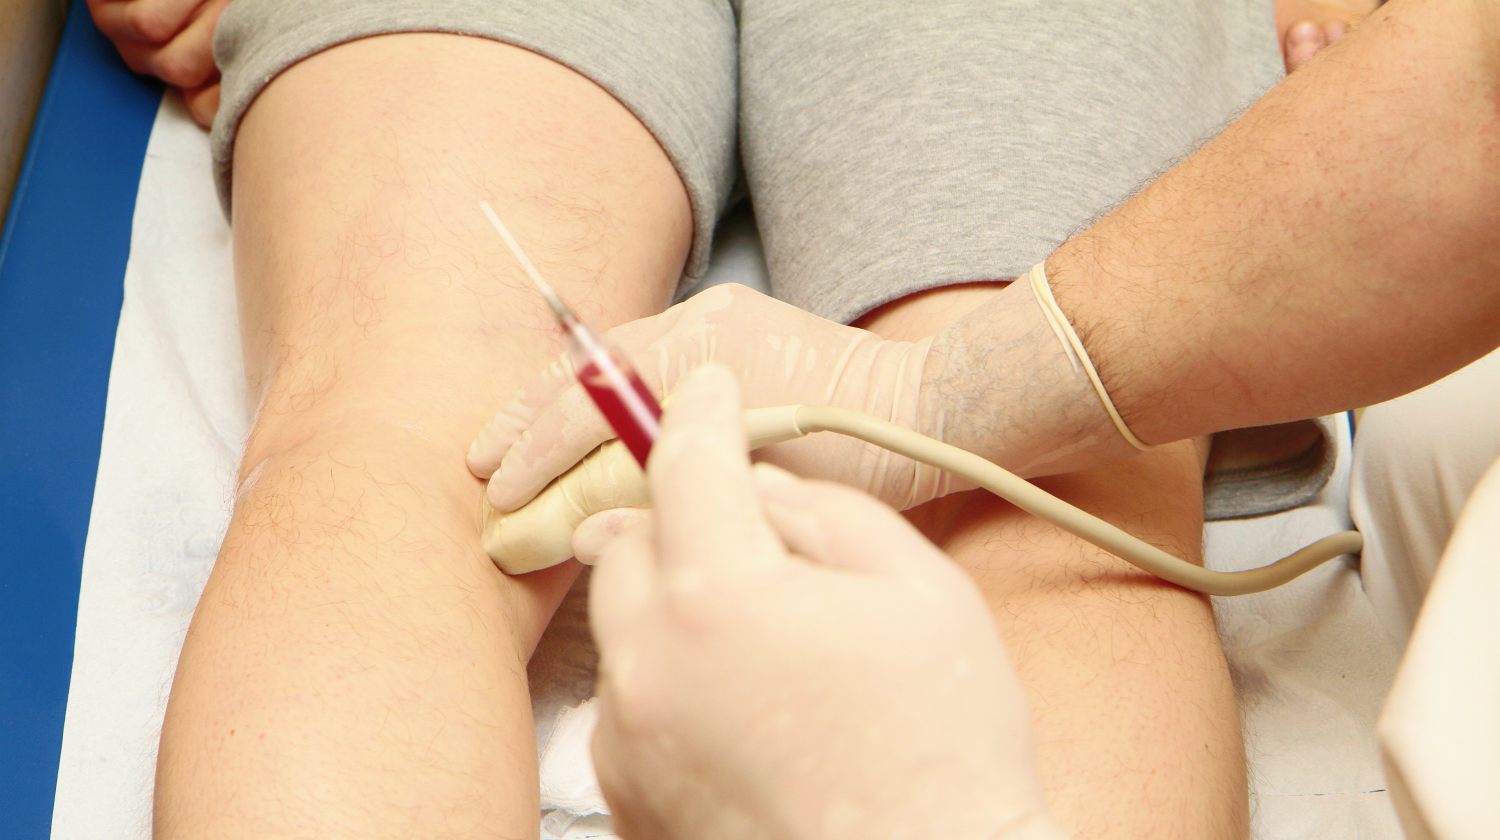 Prolotherapy and PRP tennis Elbow Injections